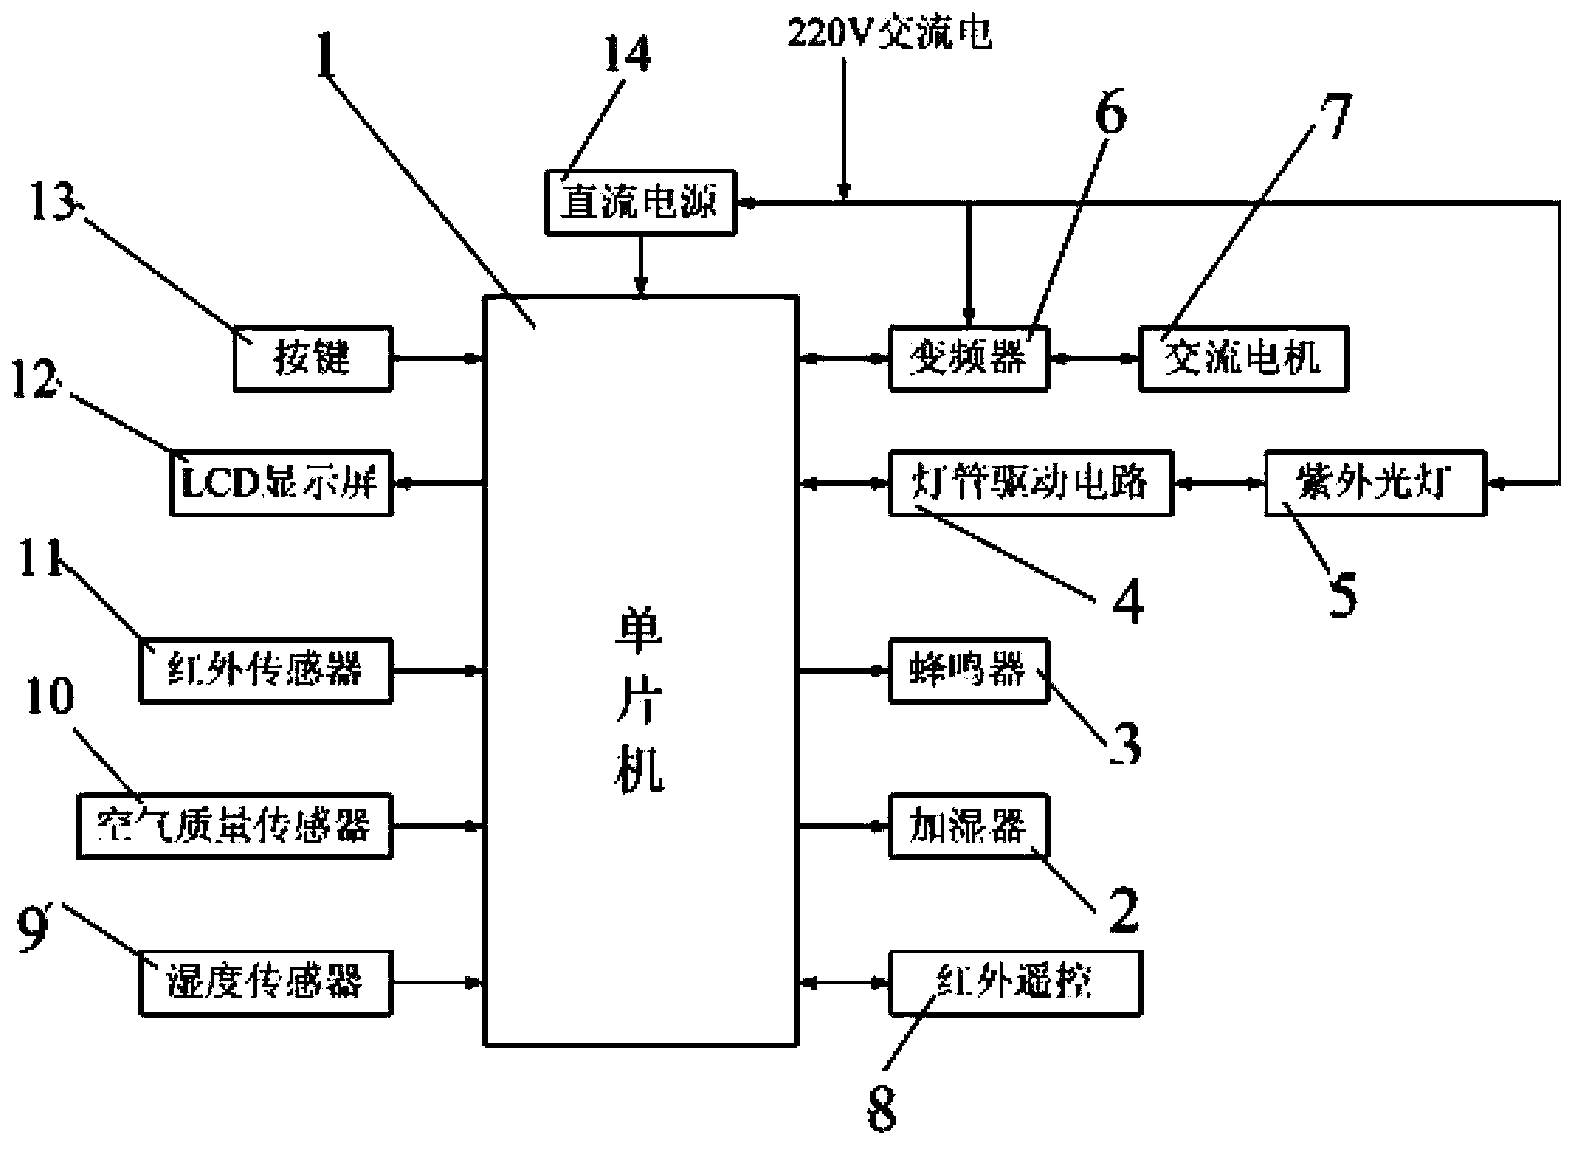 Control system for air purifier